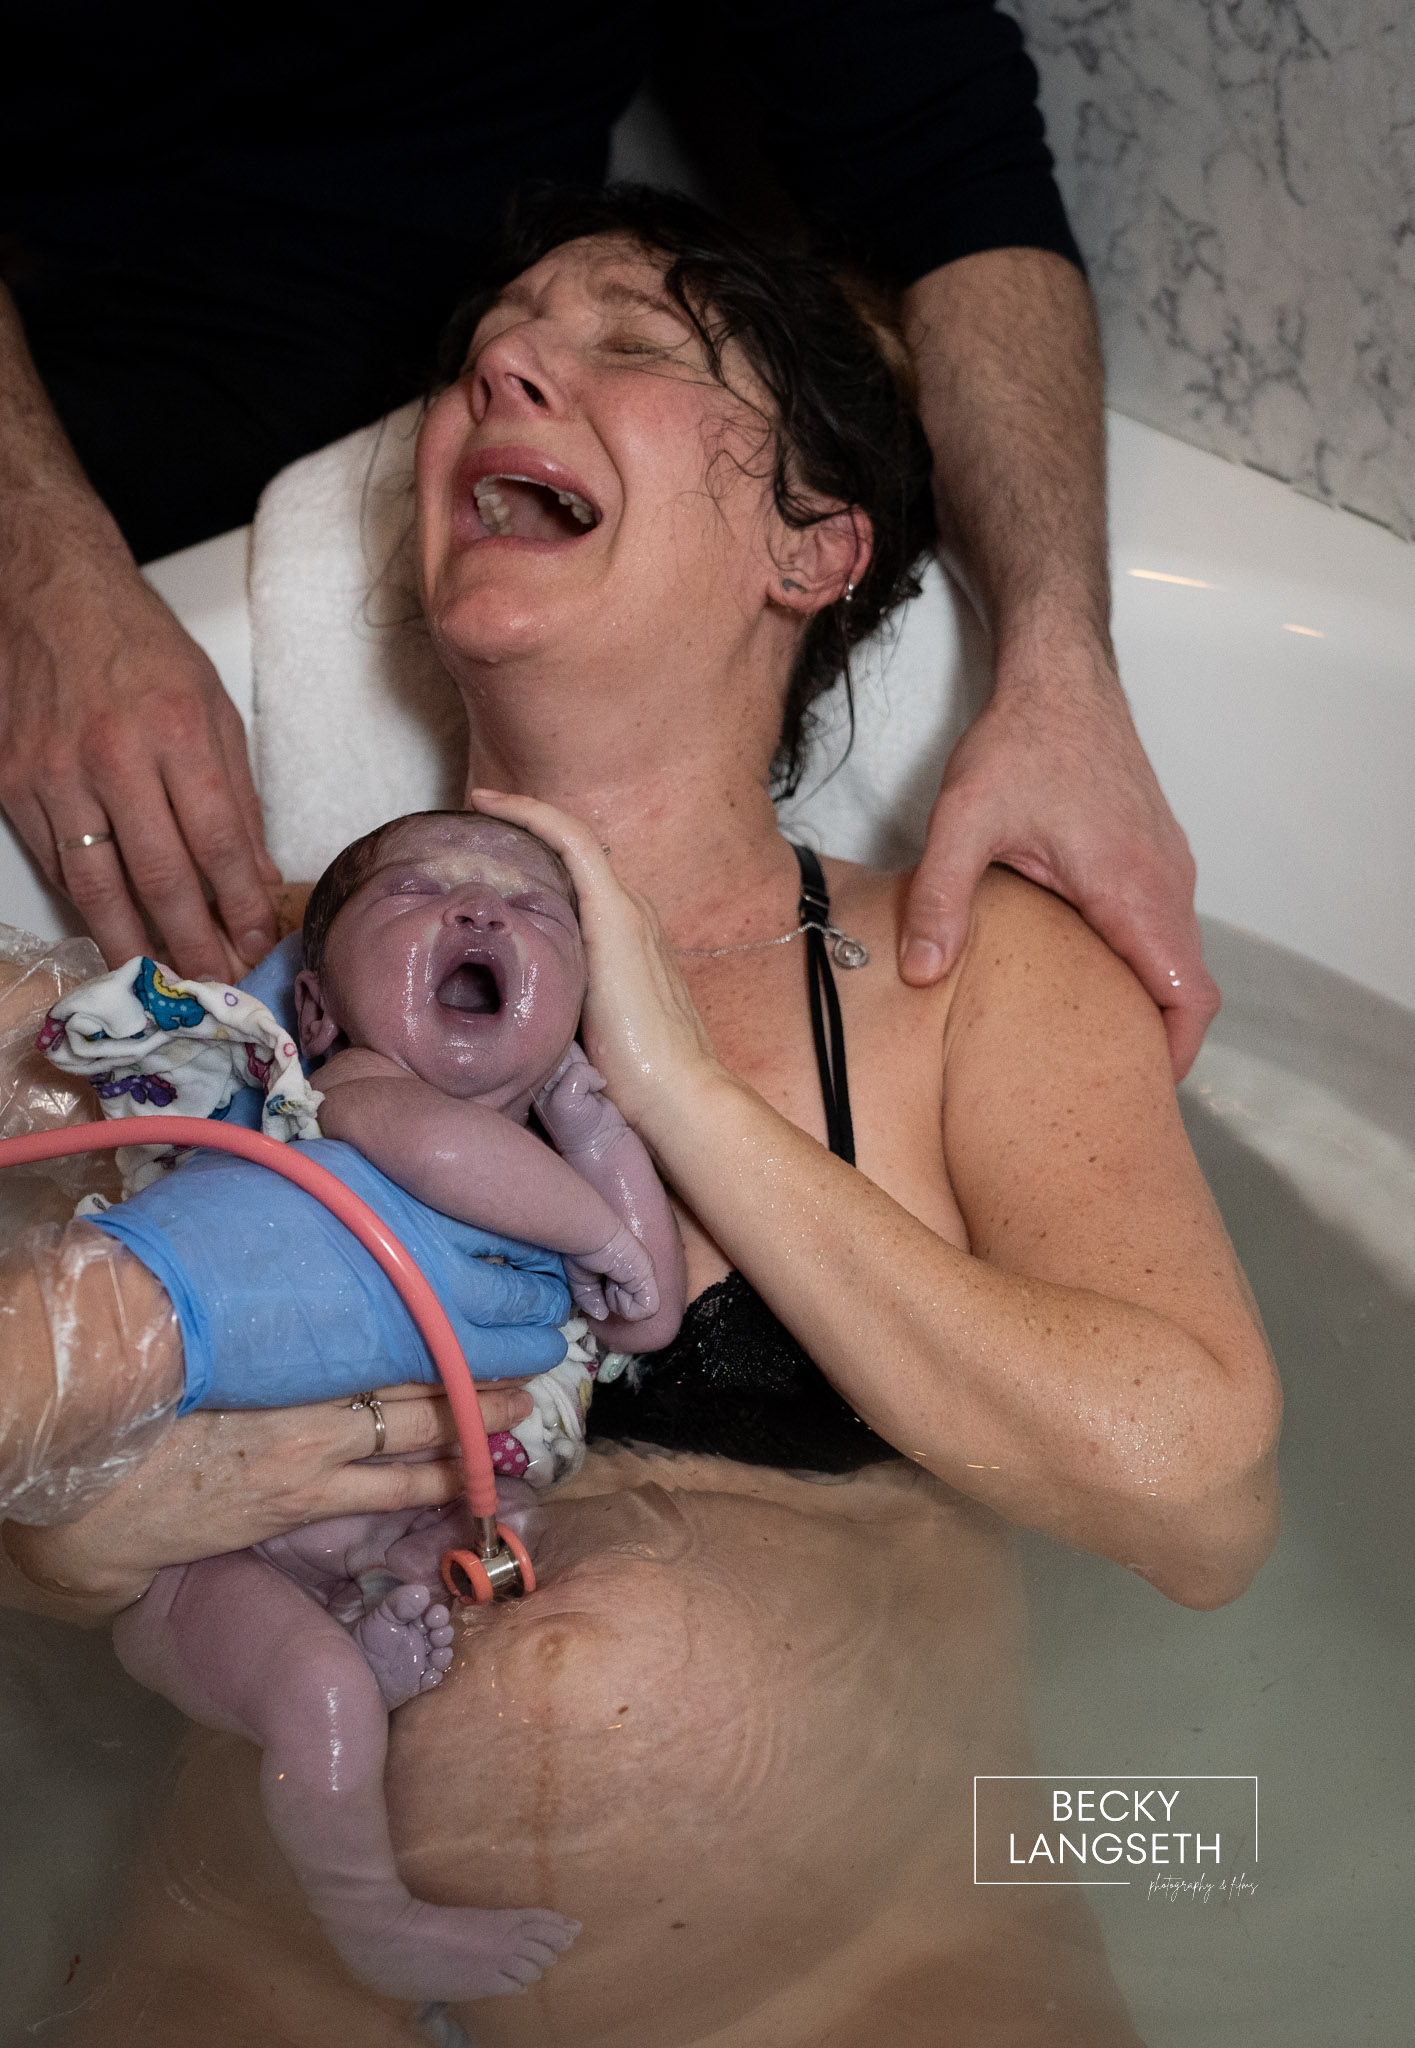 A mother and baby cry as the mother holds her baby for the first time after giving birth in a tub at the Puget Sound Birth Center.